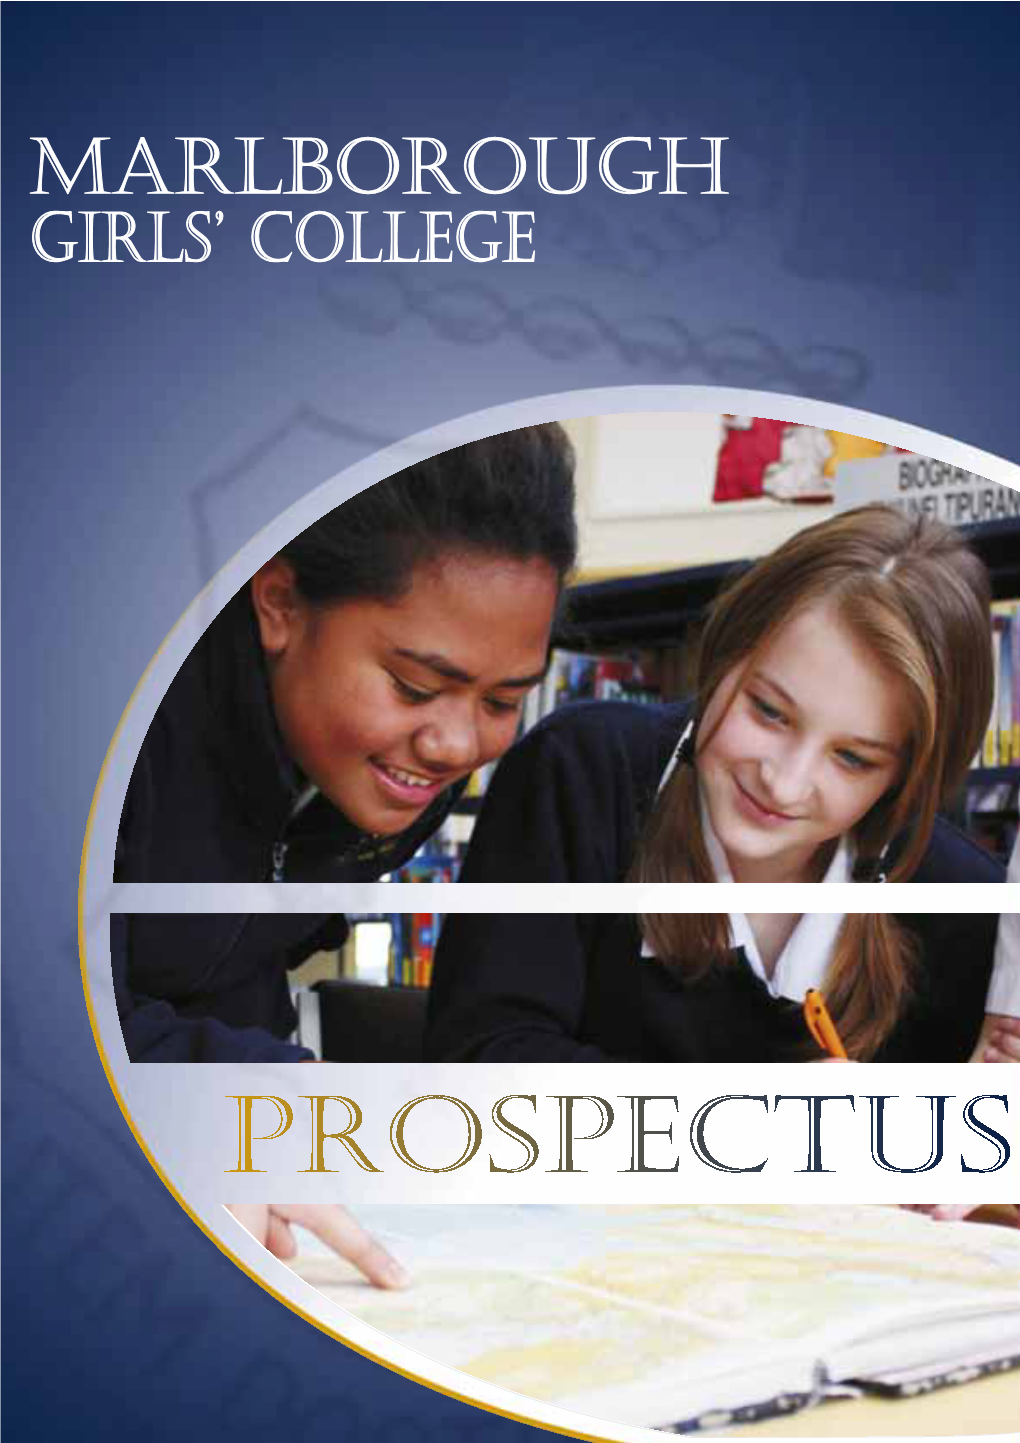 Marlborough Girls’ College Mission Statement to Empower Each Young Woman to Engage in and Succeed, Through a High Quality Education